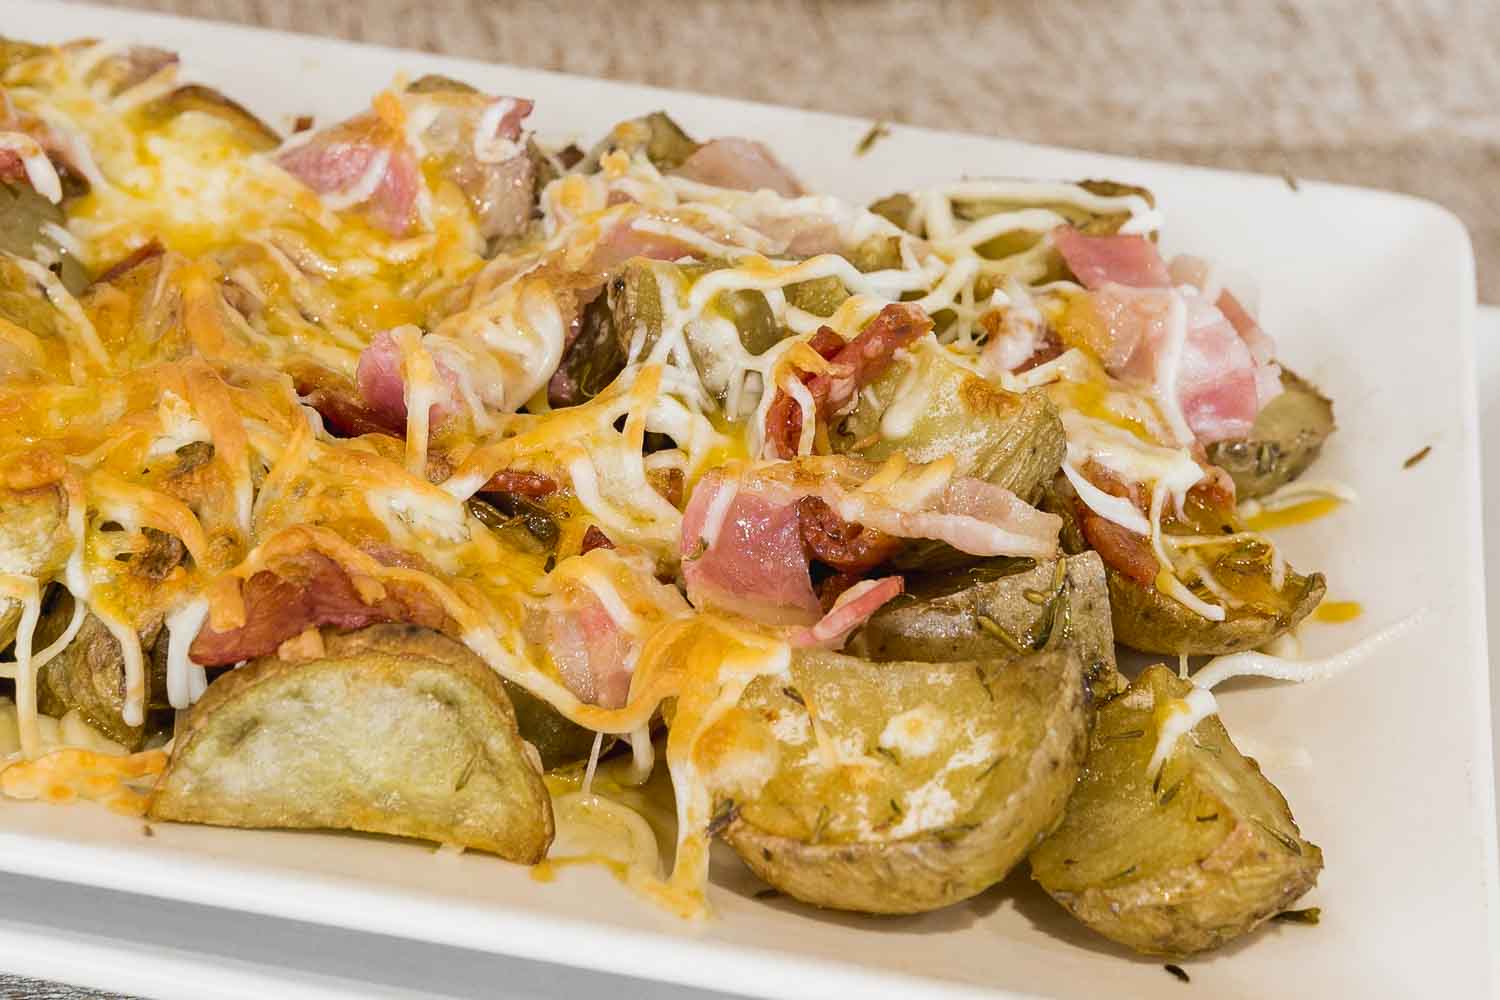 Country potatoes with cheese, bacon and pepperoni